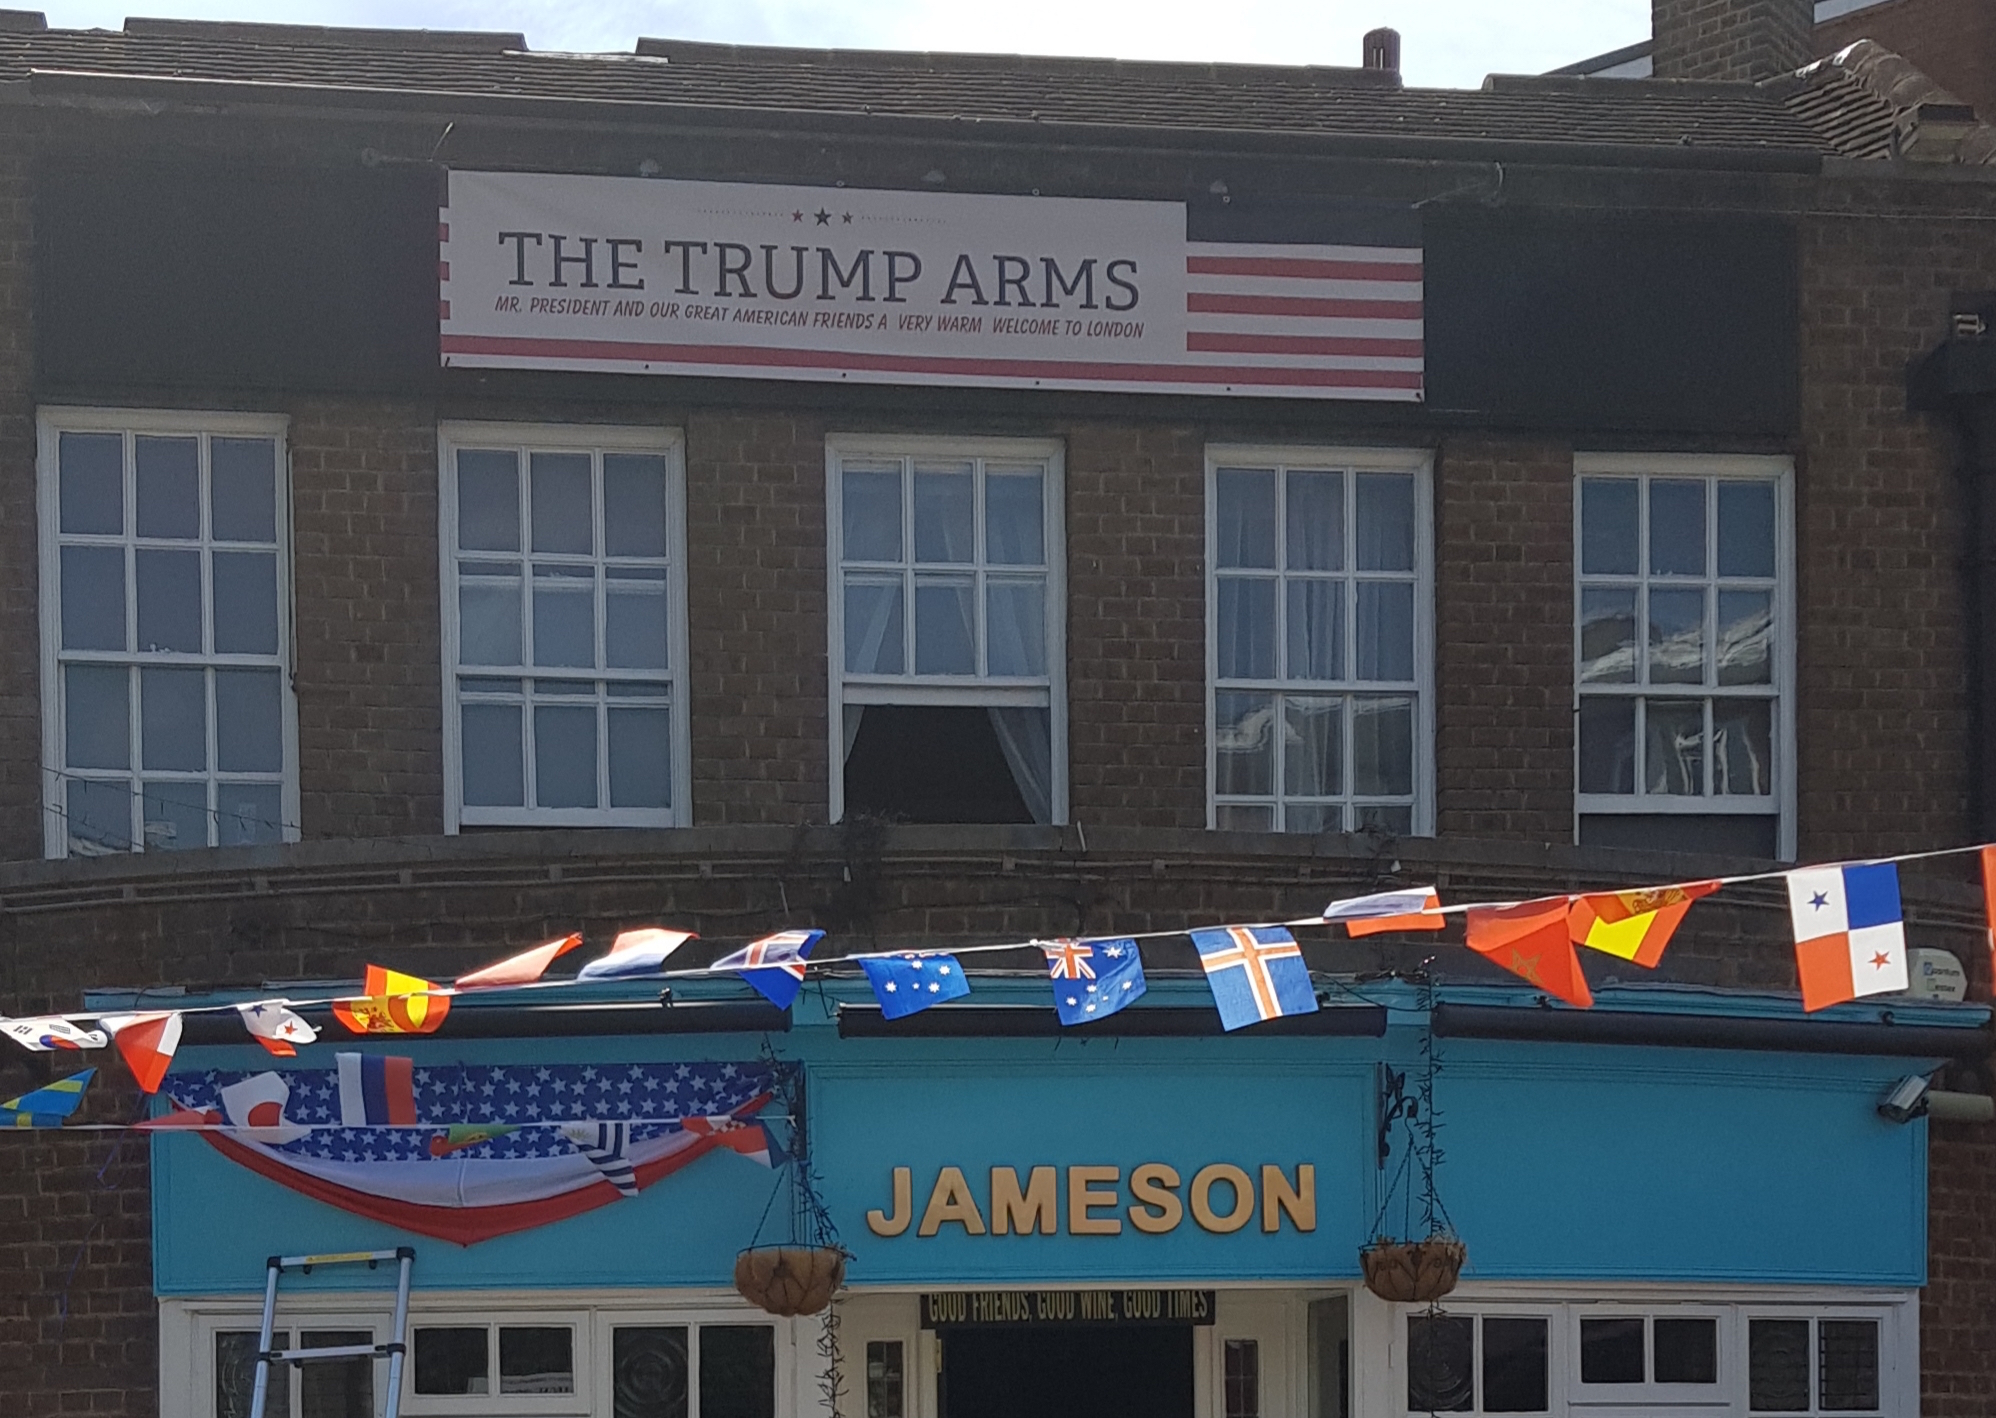 July 6 - The Jameson pub in London has rebranded as the "Trump Arms" to honor the President, who visits the U.K. next week (Damien Smyth)